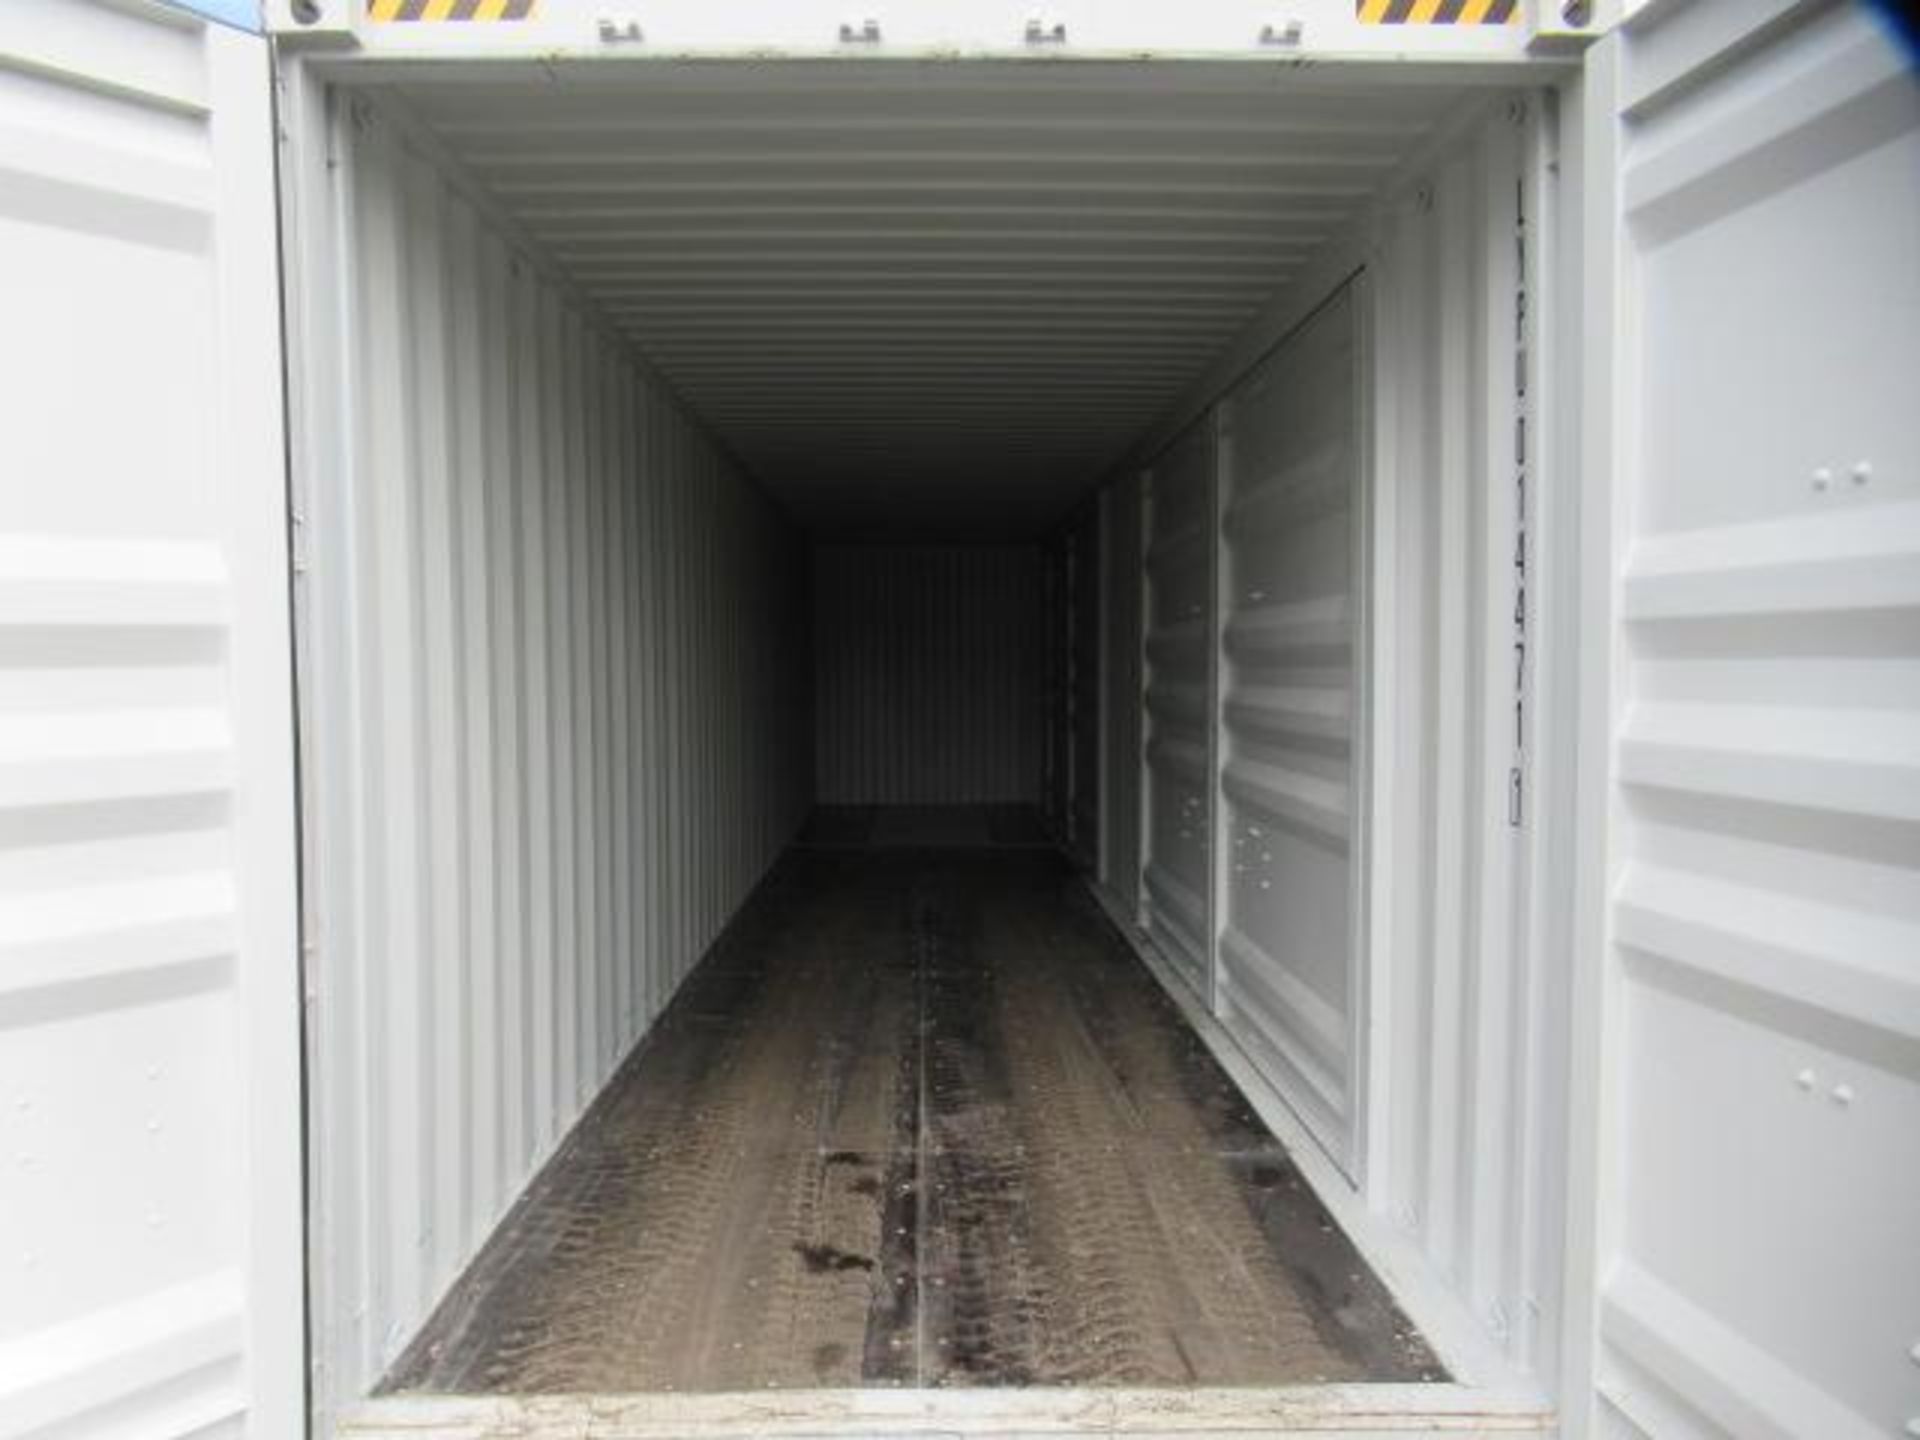 2024 40' HIGH CUBE SHIPPING CONTAINER W/ (2) SIDE DOORS, SER#: LYPU0144711 (UNUSED) - Image 5 of 6